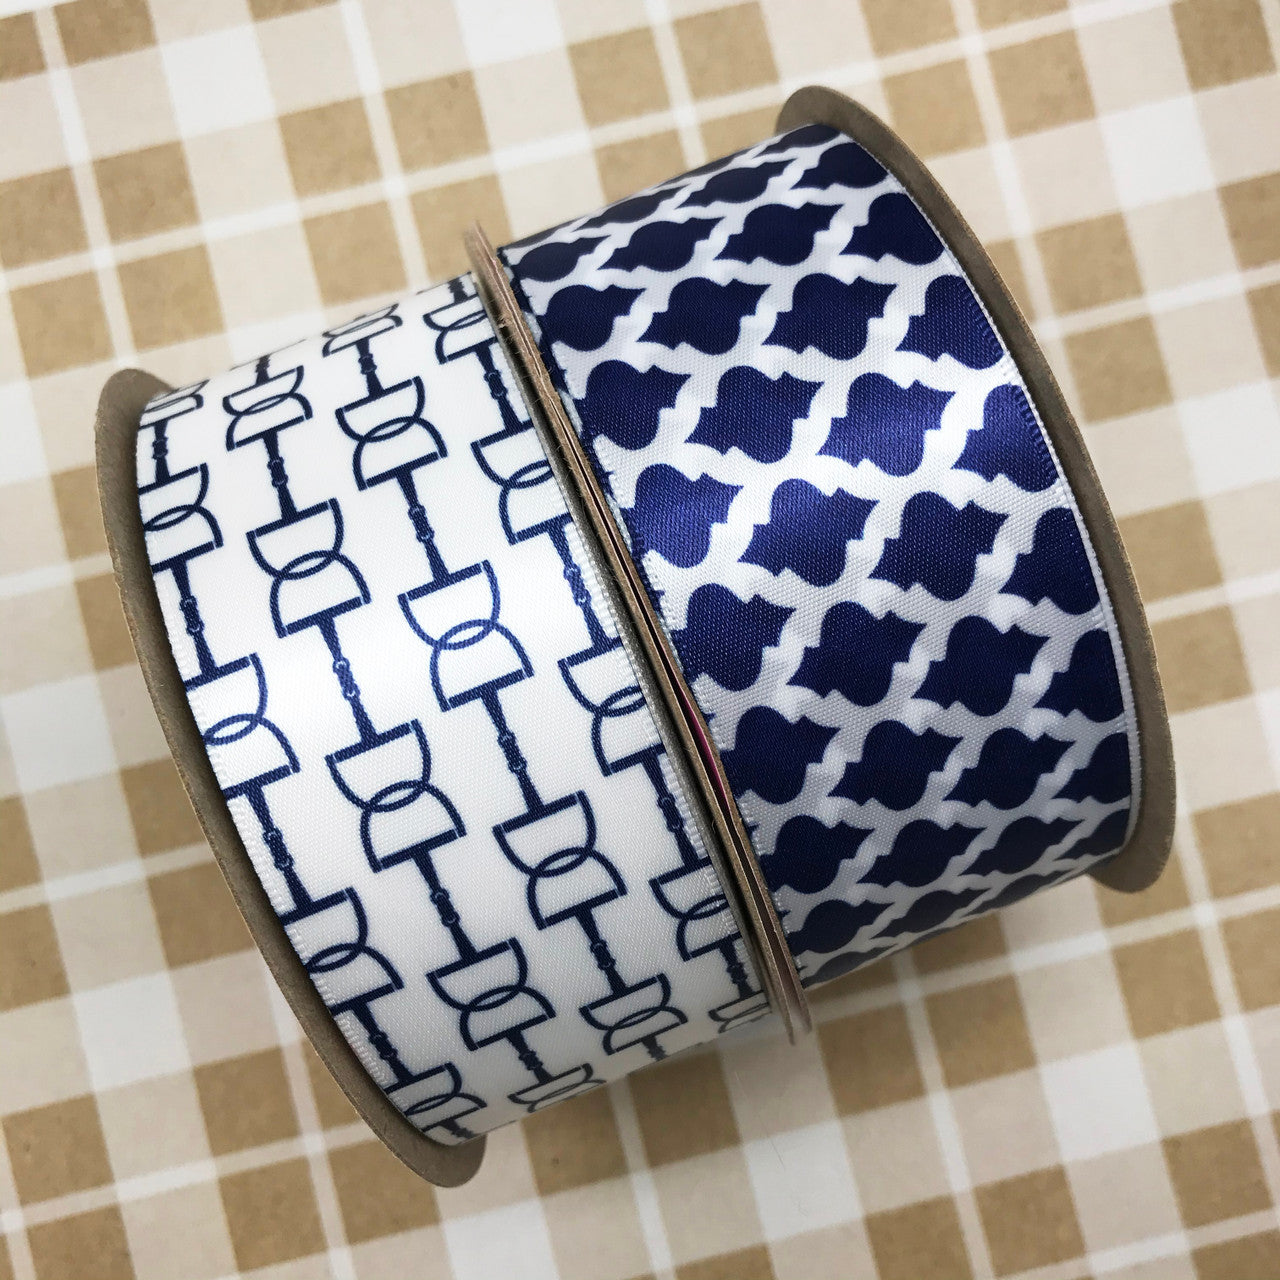 Our navy blue Quatrefoil ribbon pairs beautifully with our snaffle bit ribbons for the Equestrian lovers out there!